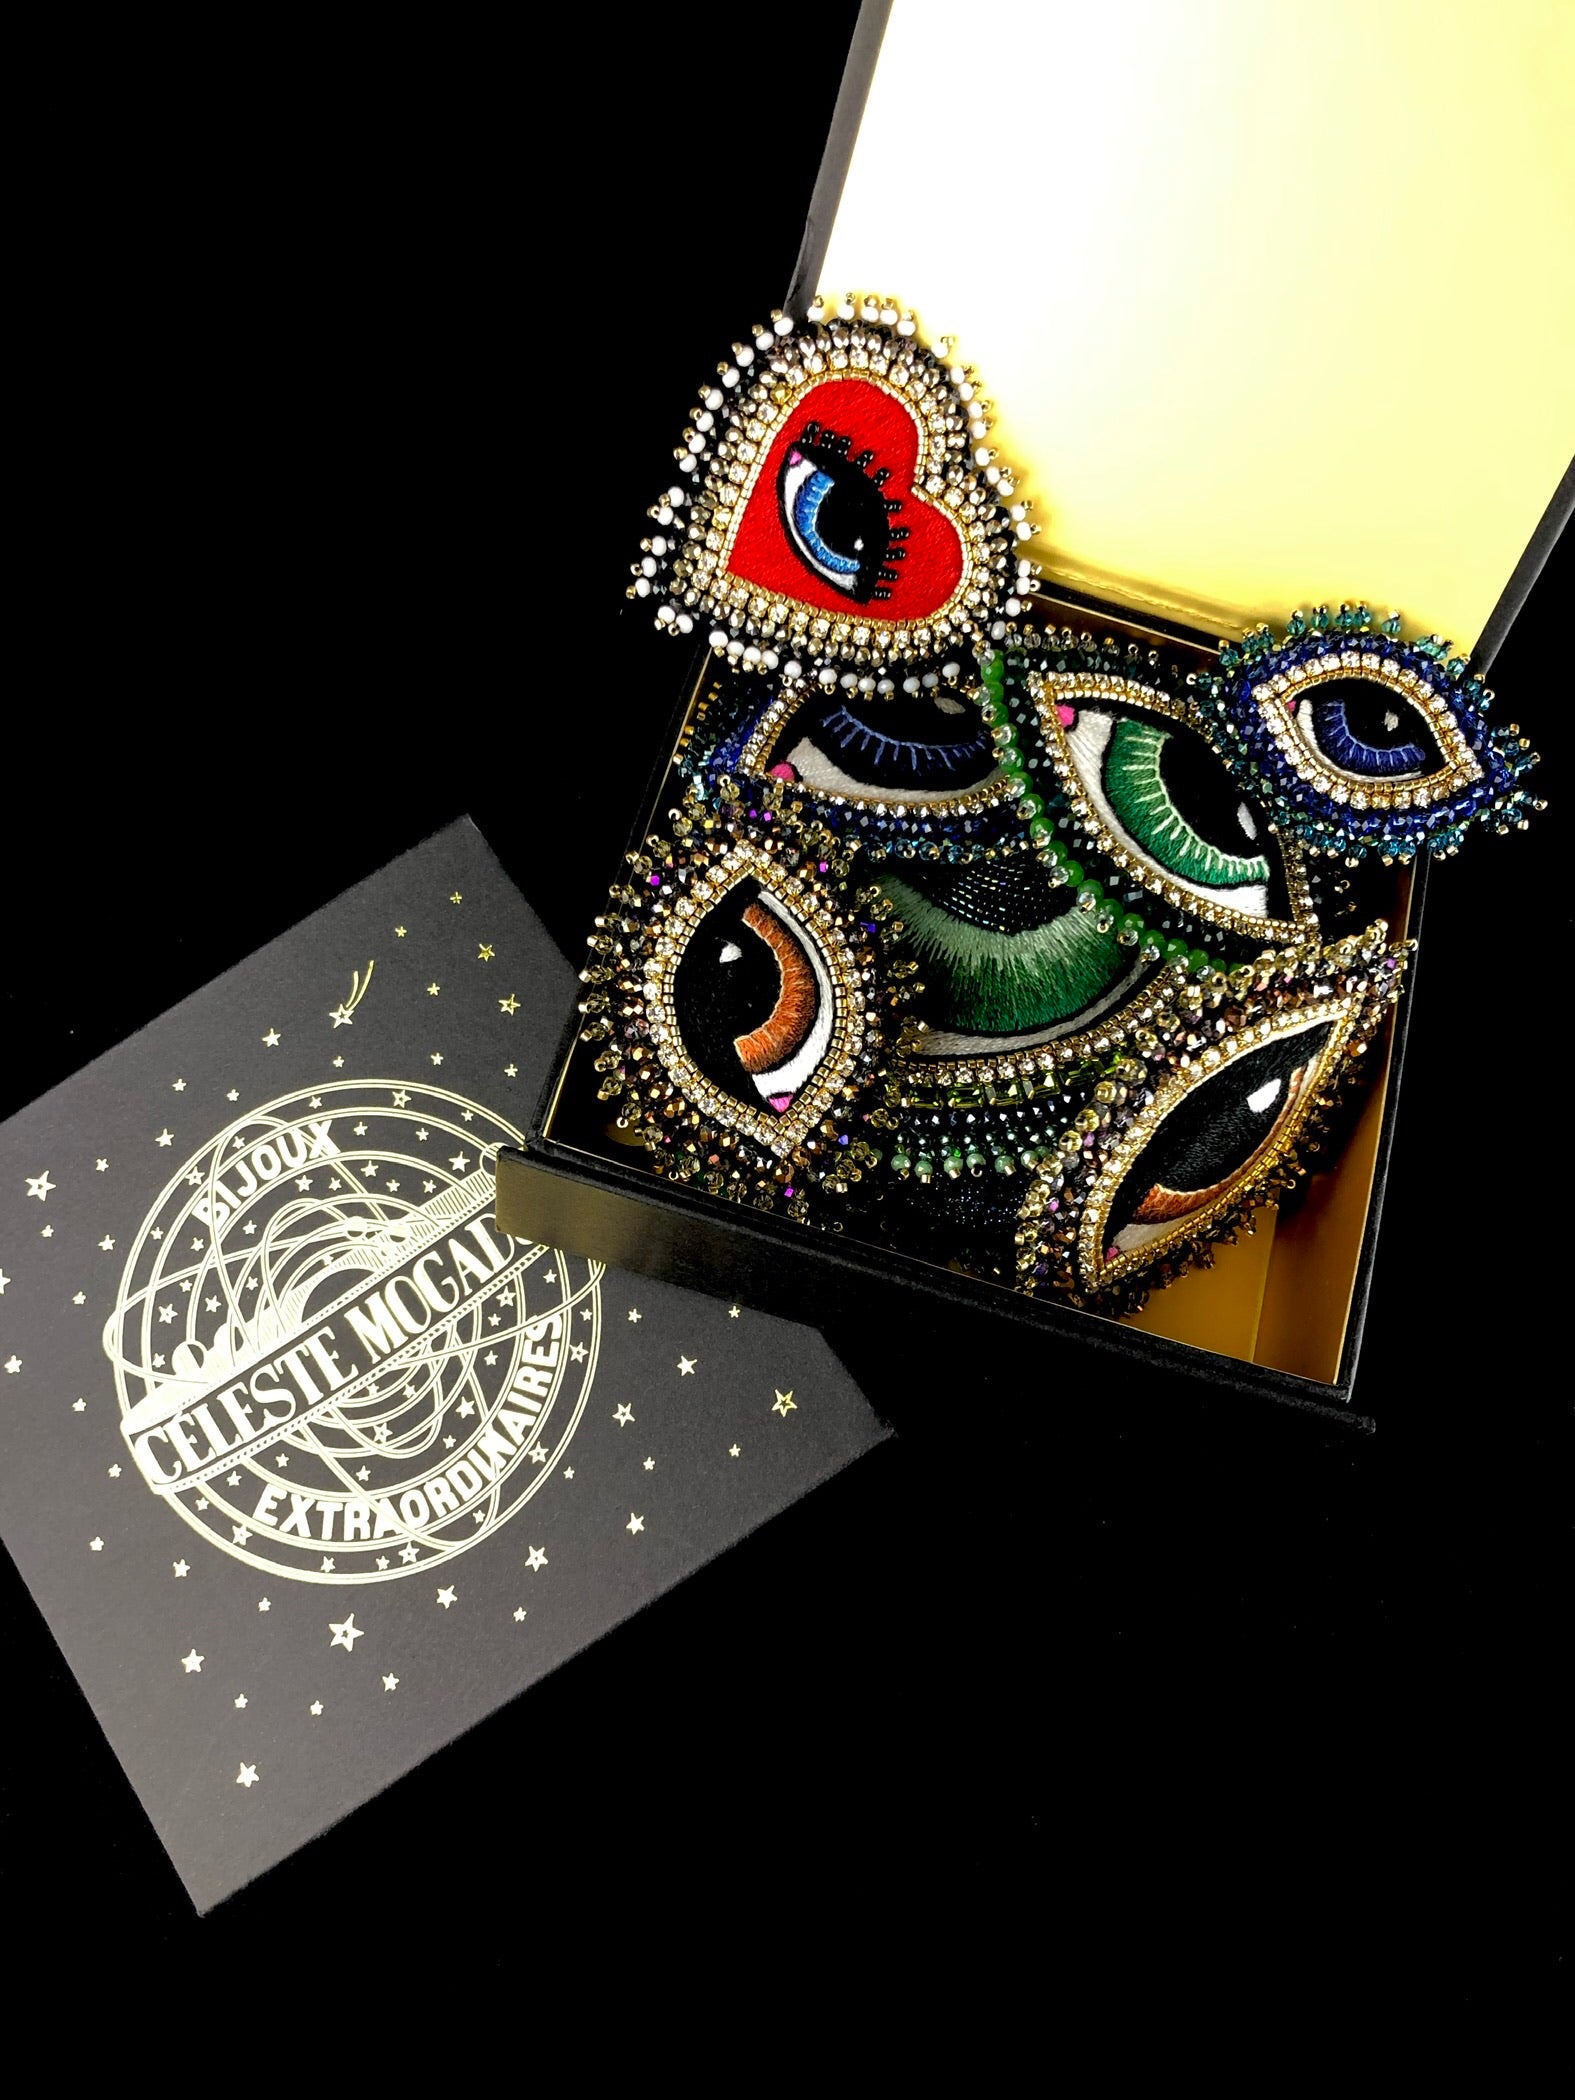 A collection of Celeste Mogador brooches shown in designer's packaging